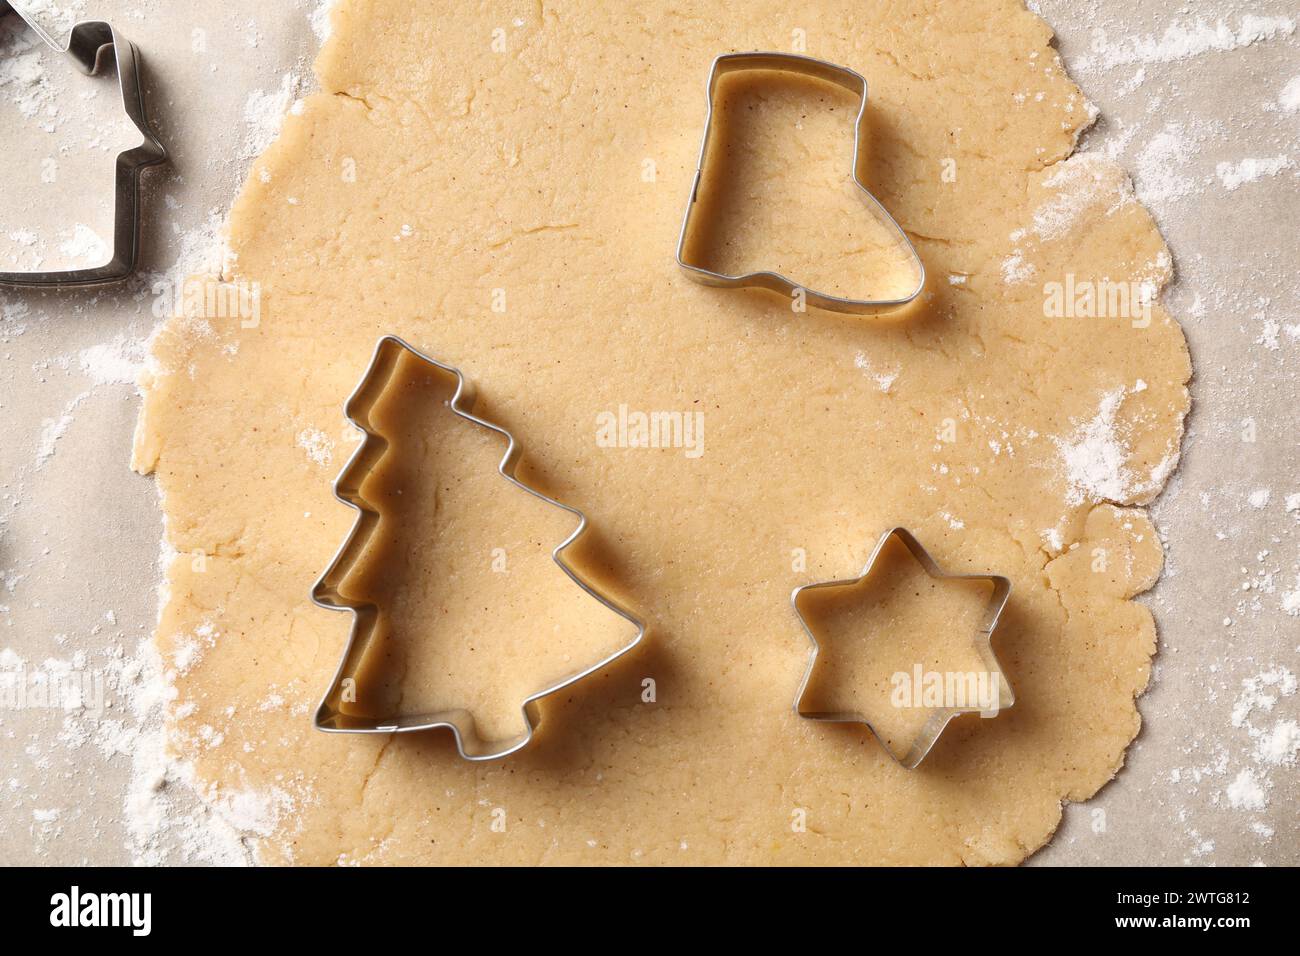 Making Christmas cookies. Raw dough and metal cutters on parchment paper, flat lay Stock Photo